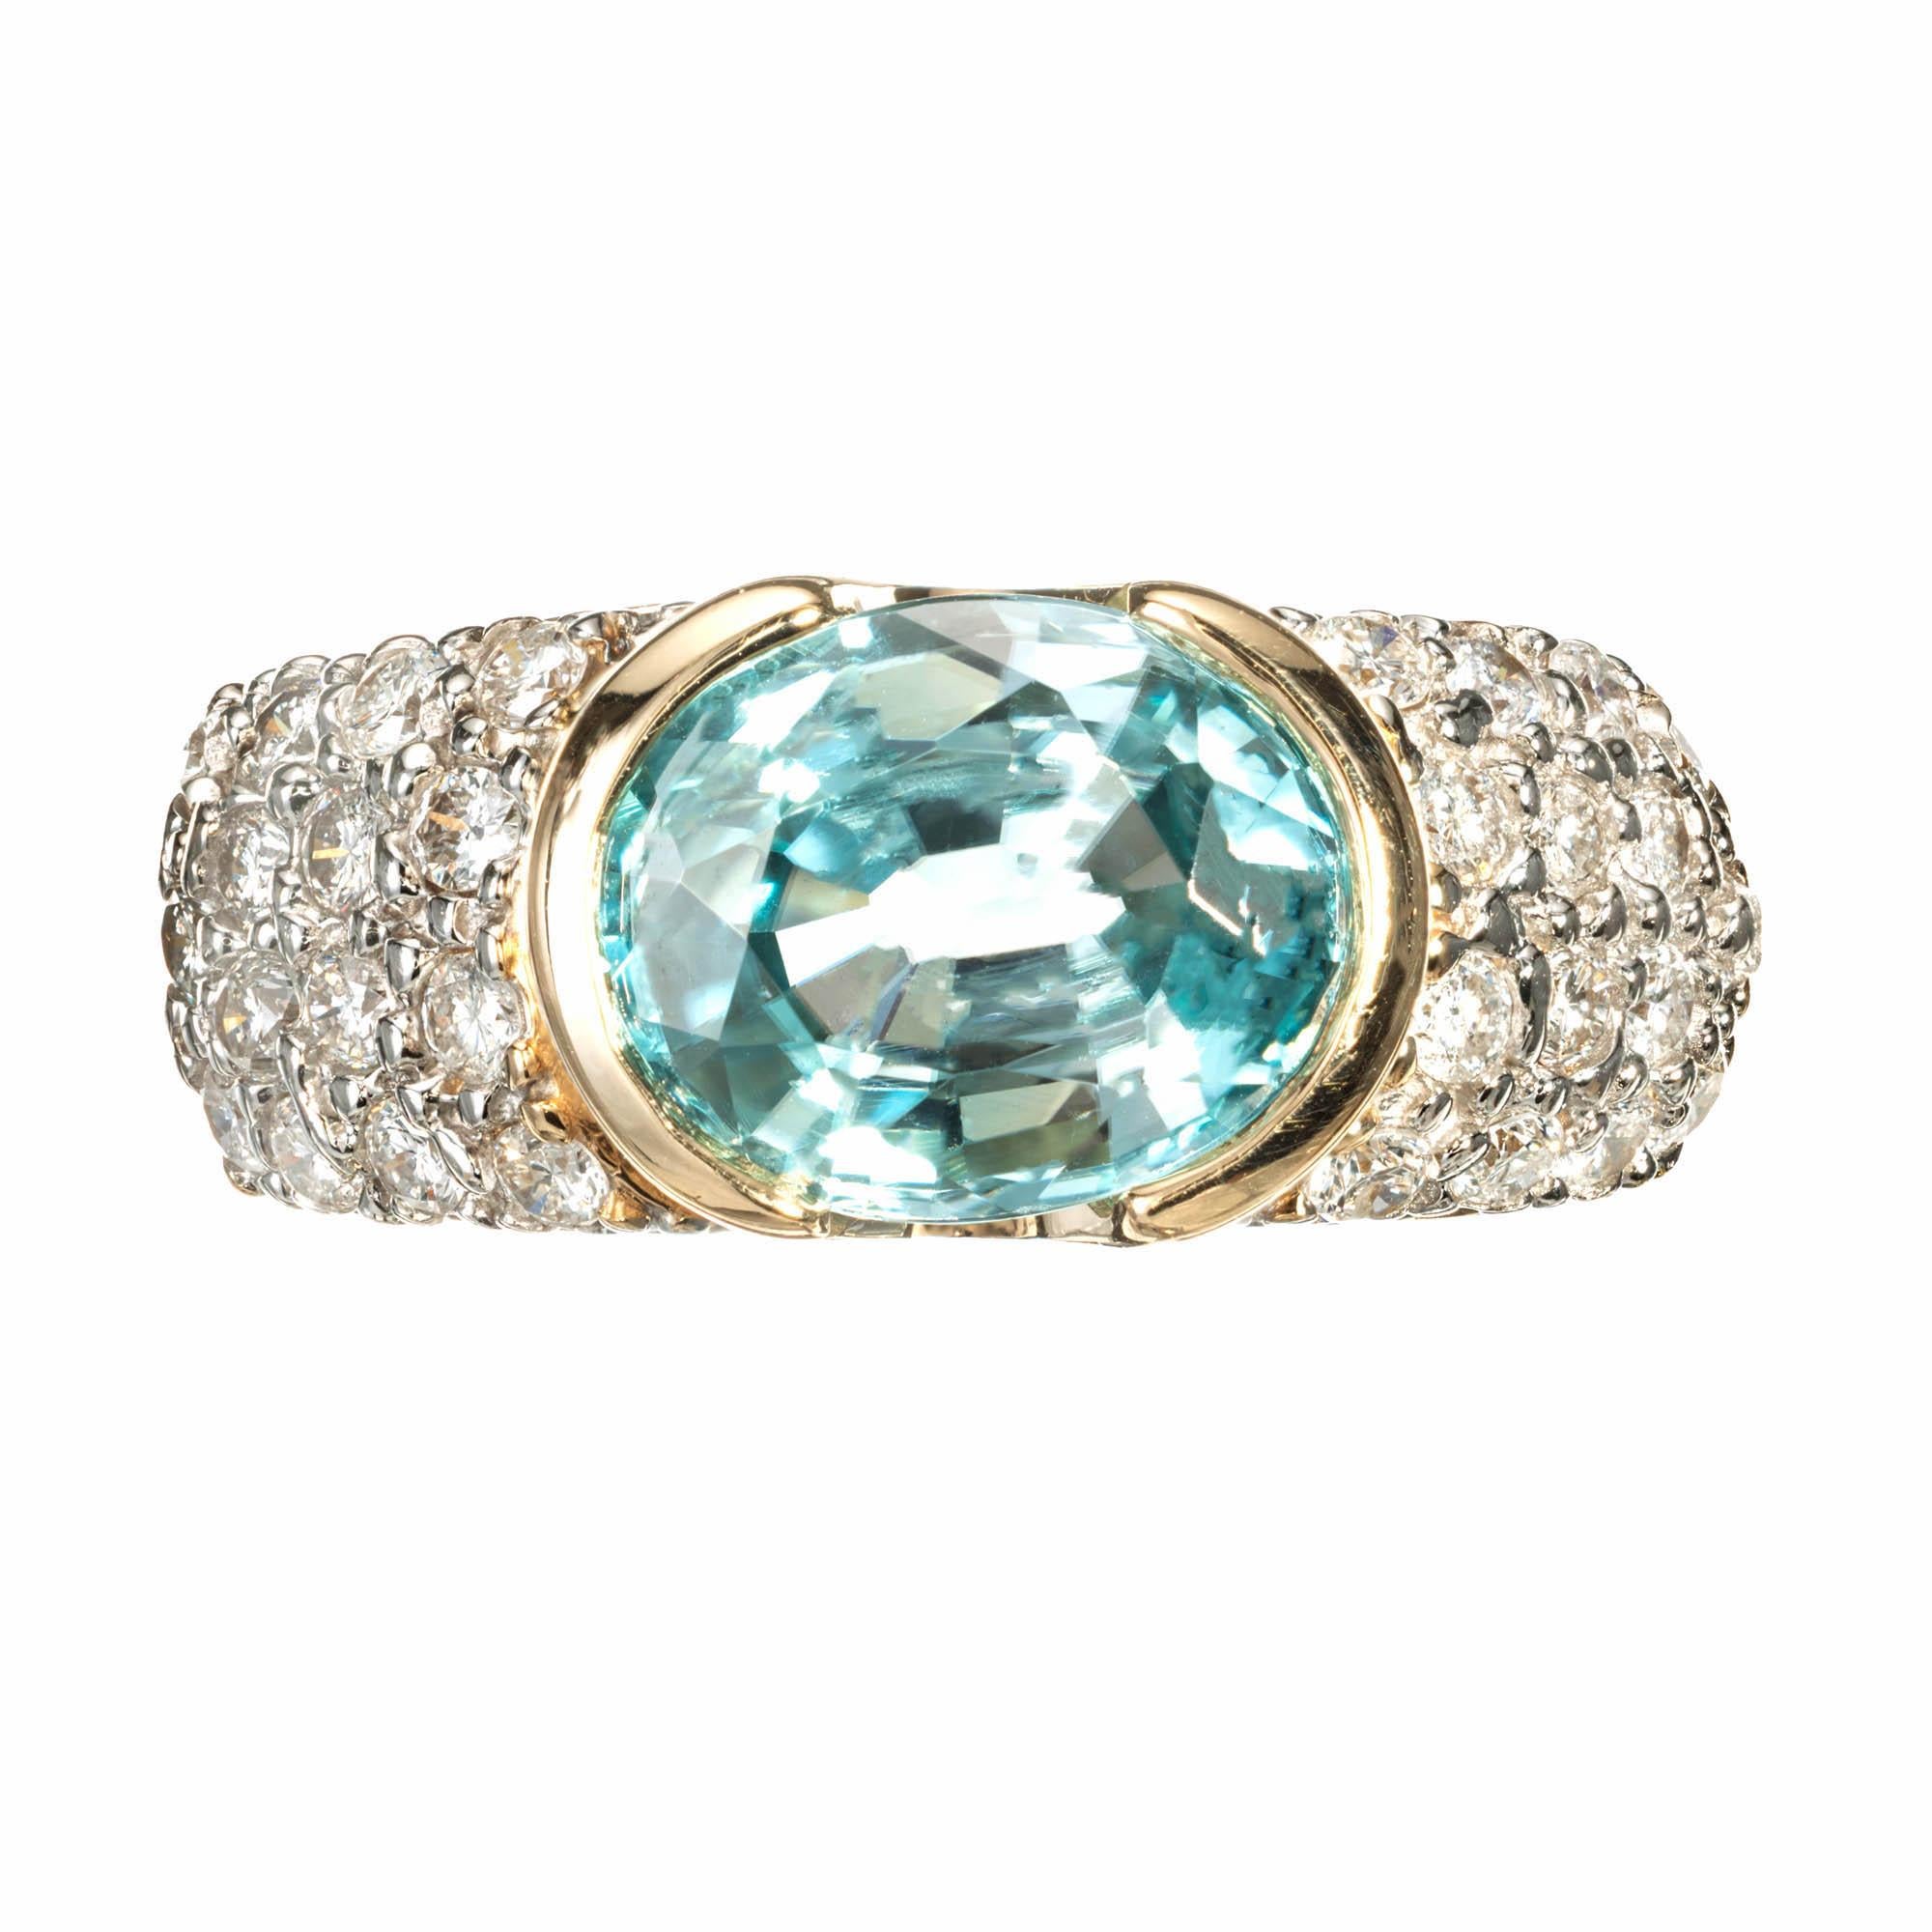  3.00ct Oval blue Zircon Diamond 14k yellow gold ring. Oval Zircon bezel set horizontally in a 14k yellow gold ring with round pave set accent diamonds set in white gold on each side of the setting.

1 oval blue Zircon, approx. total weight 3.00cts,